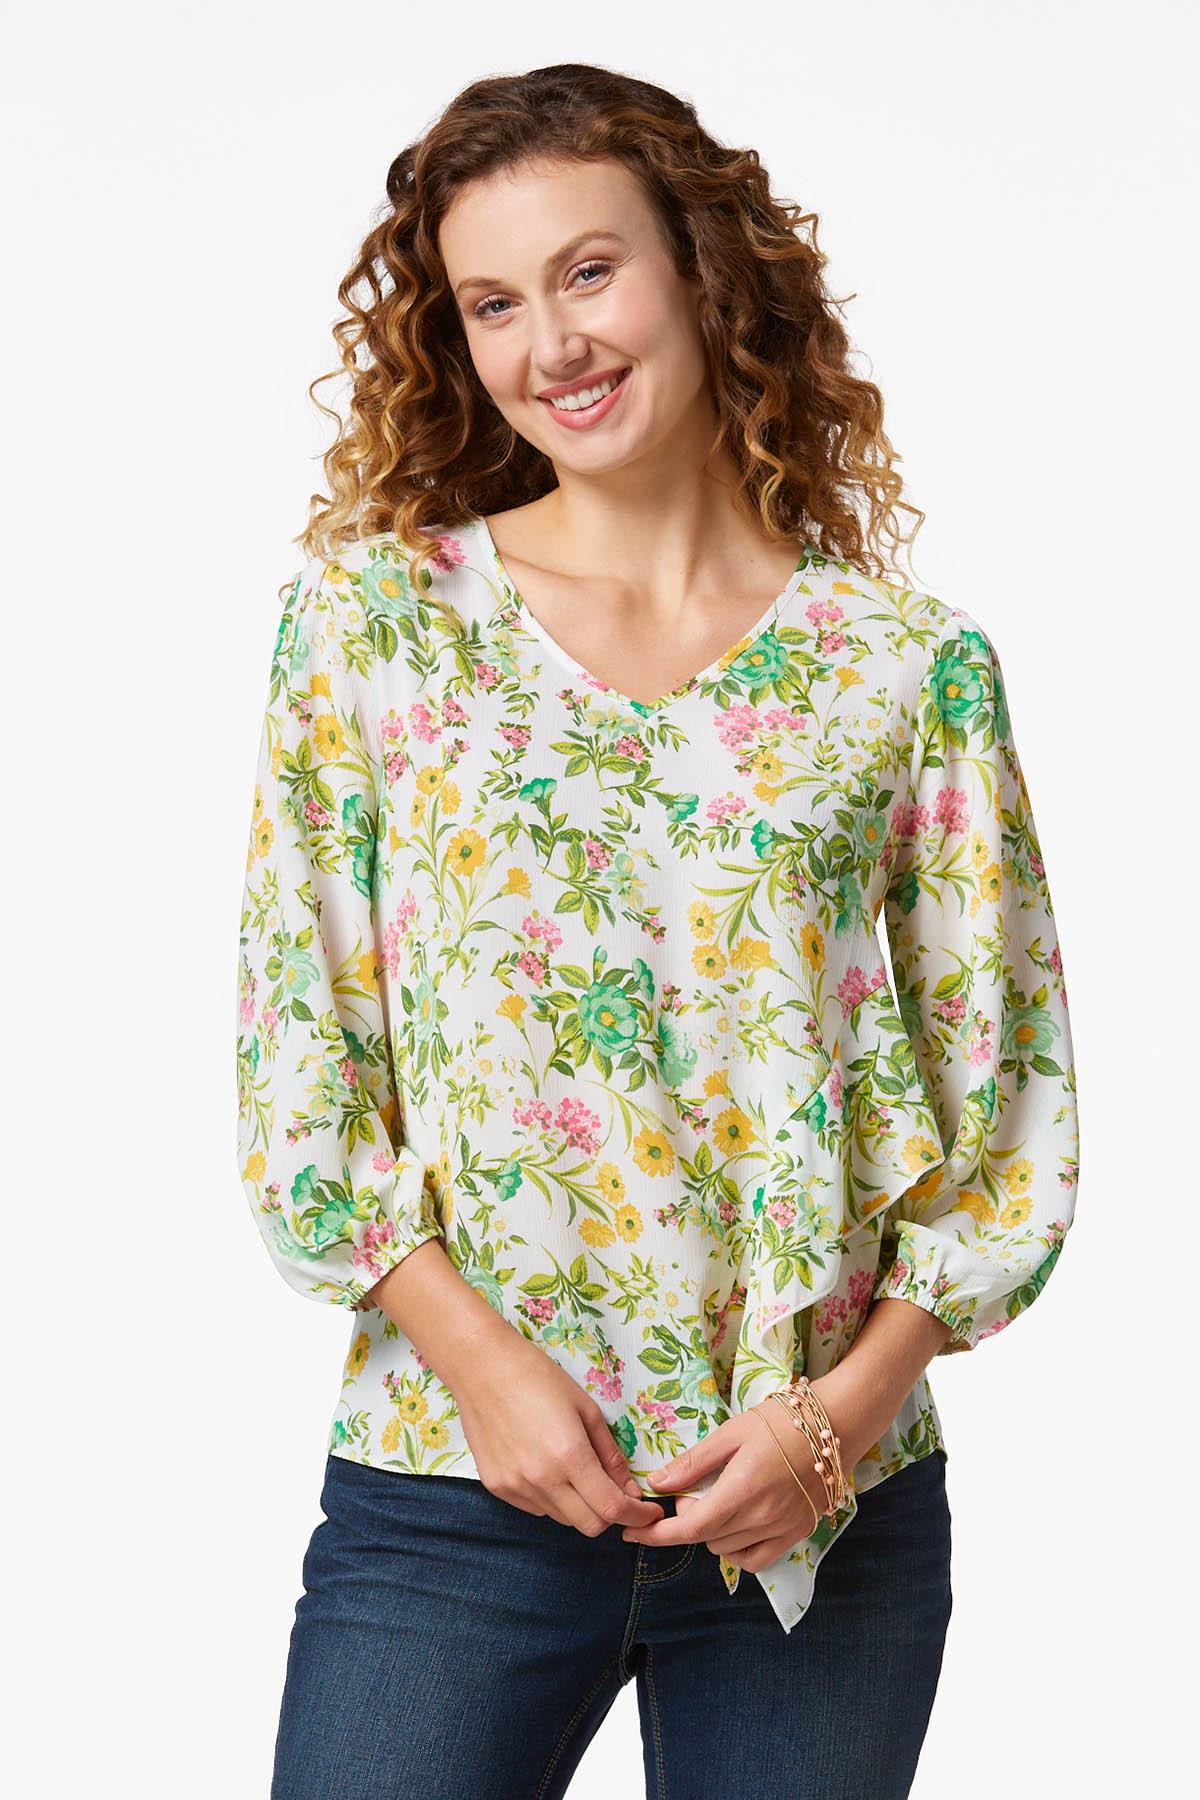 Cato Fashions  Cato Ruffled Spring Floral Top